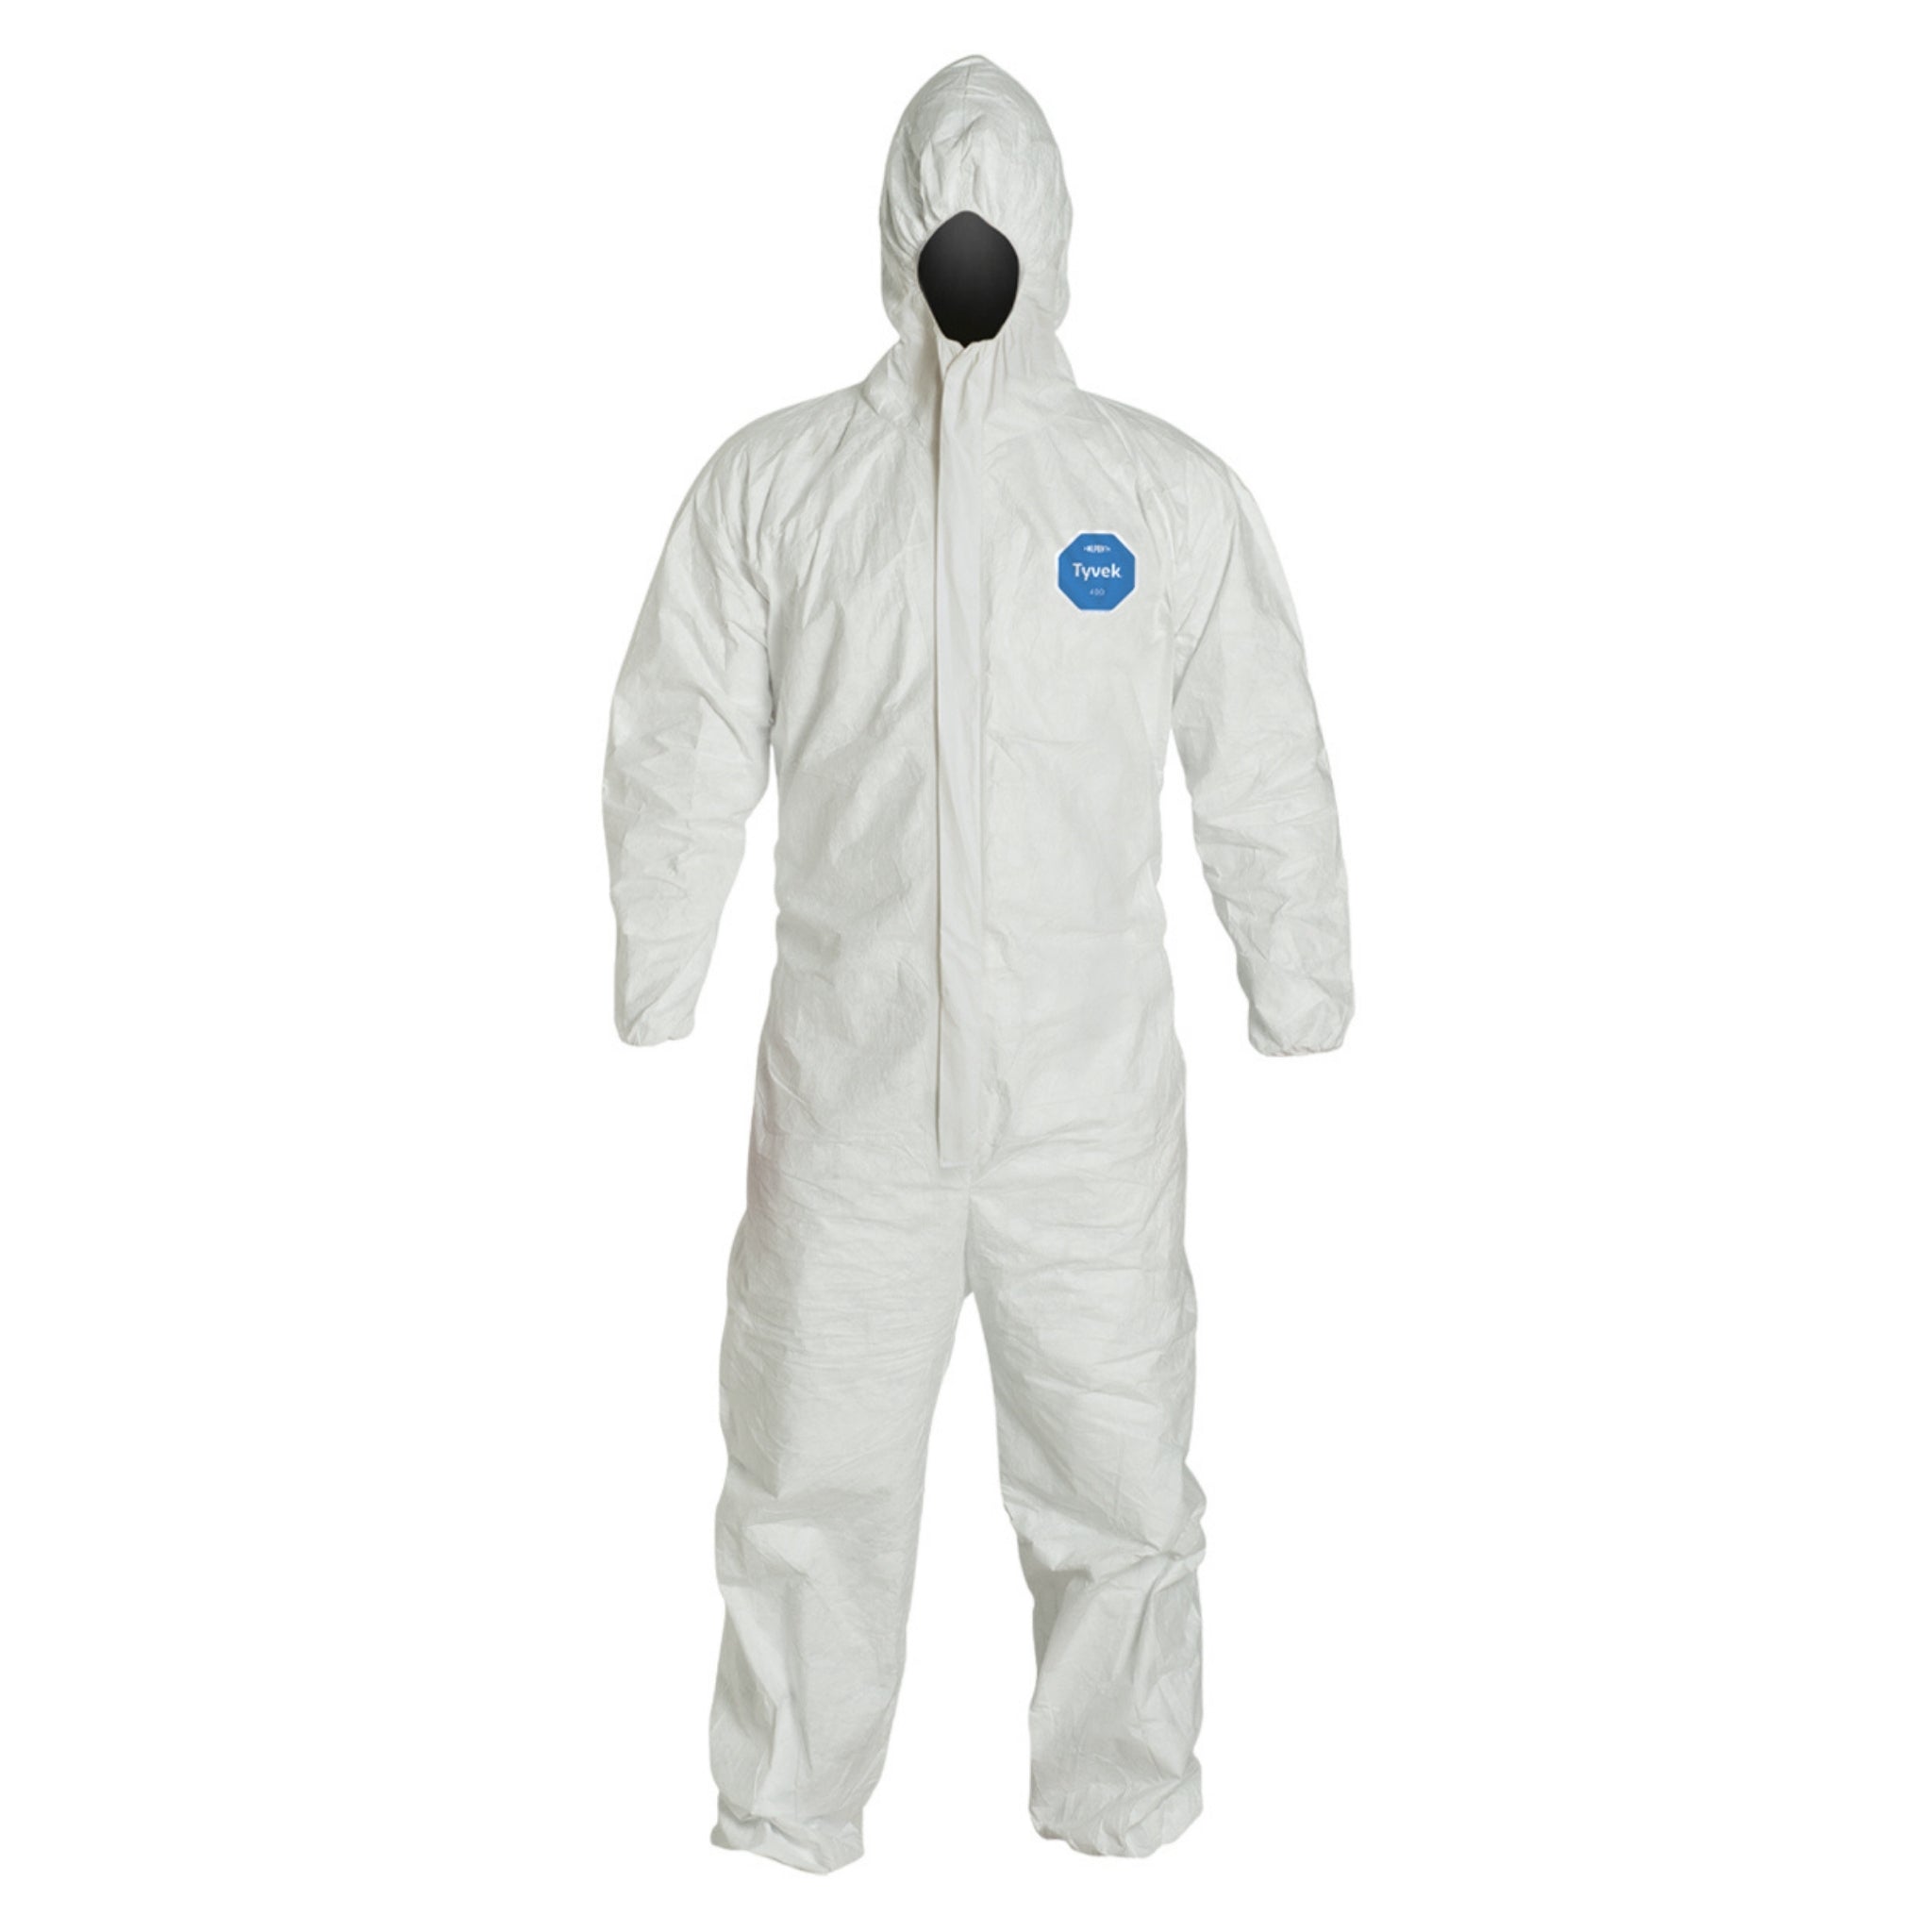 DuPont TY127S- Case of 25: Tyvek 400 Disposable Protective Coverall, White